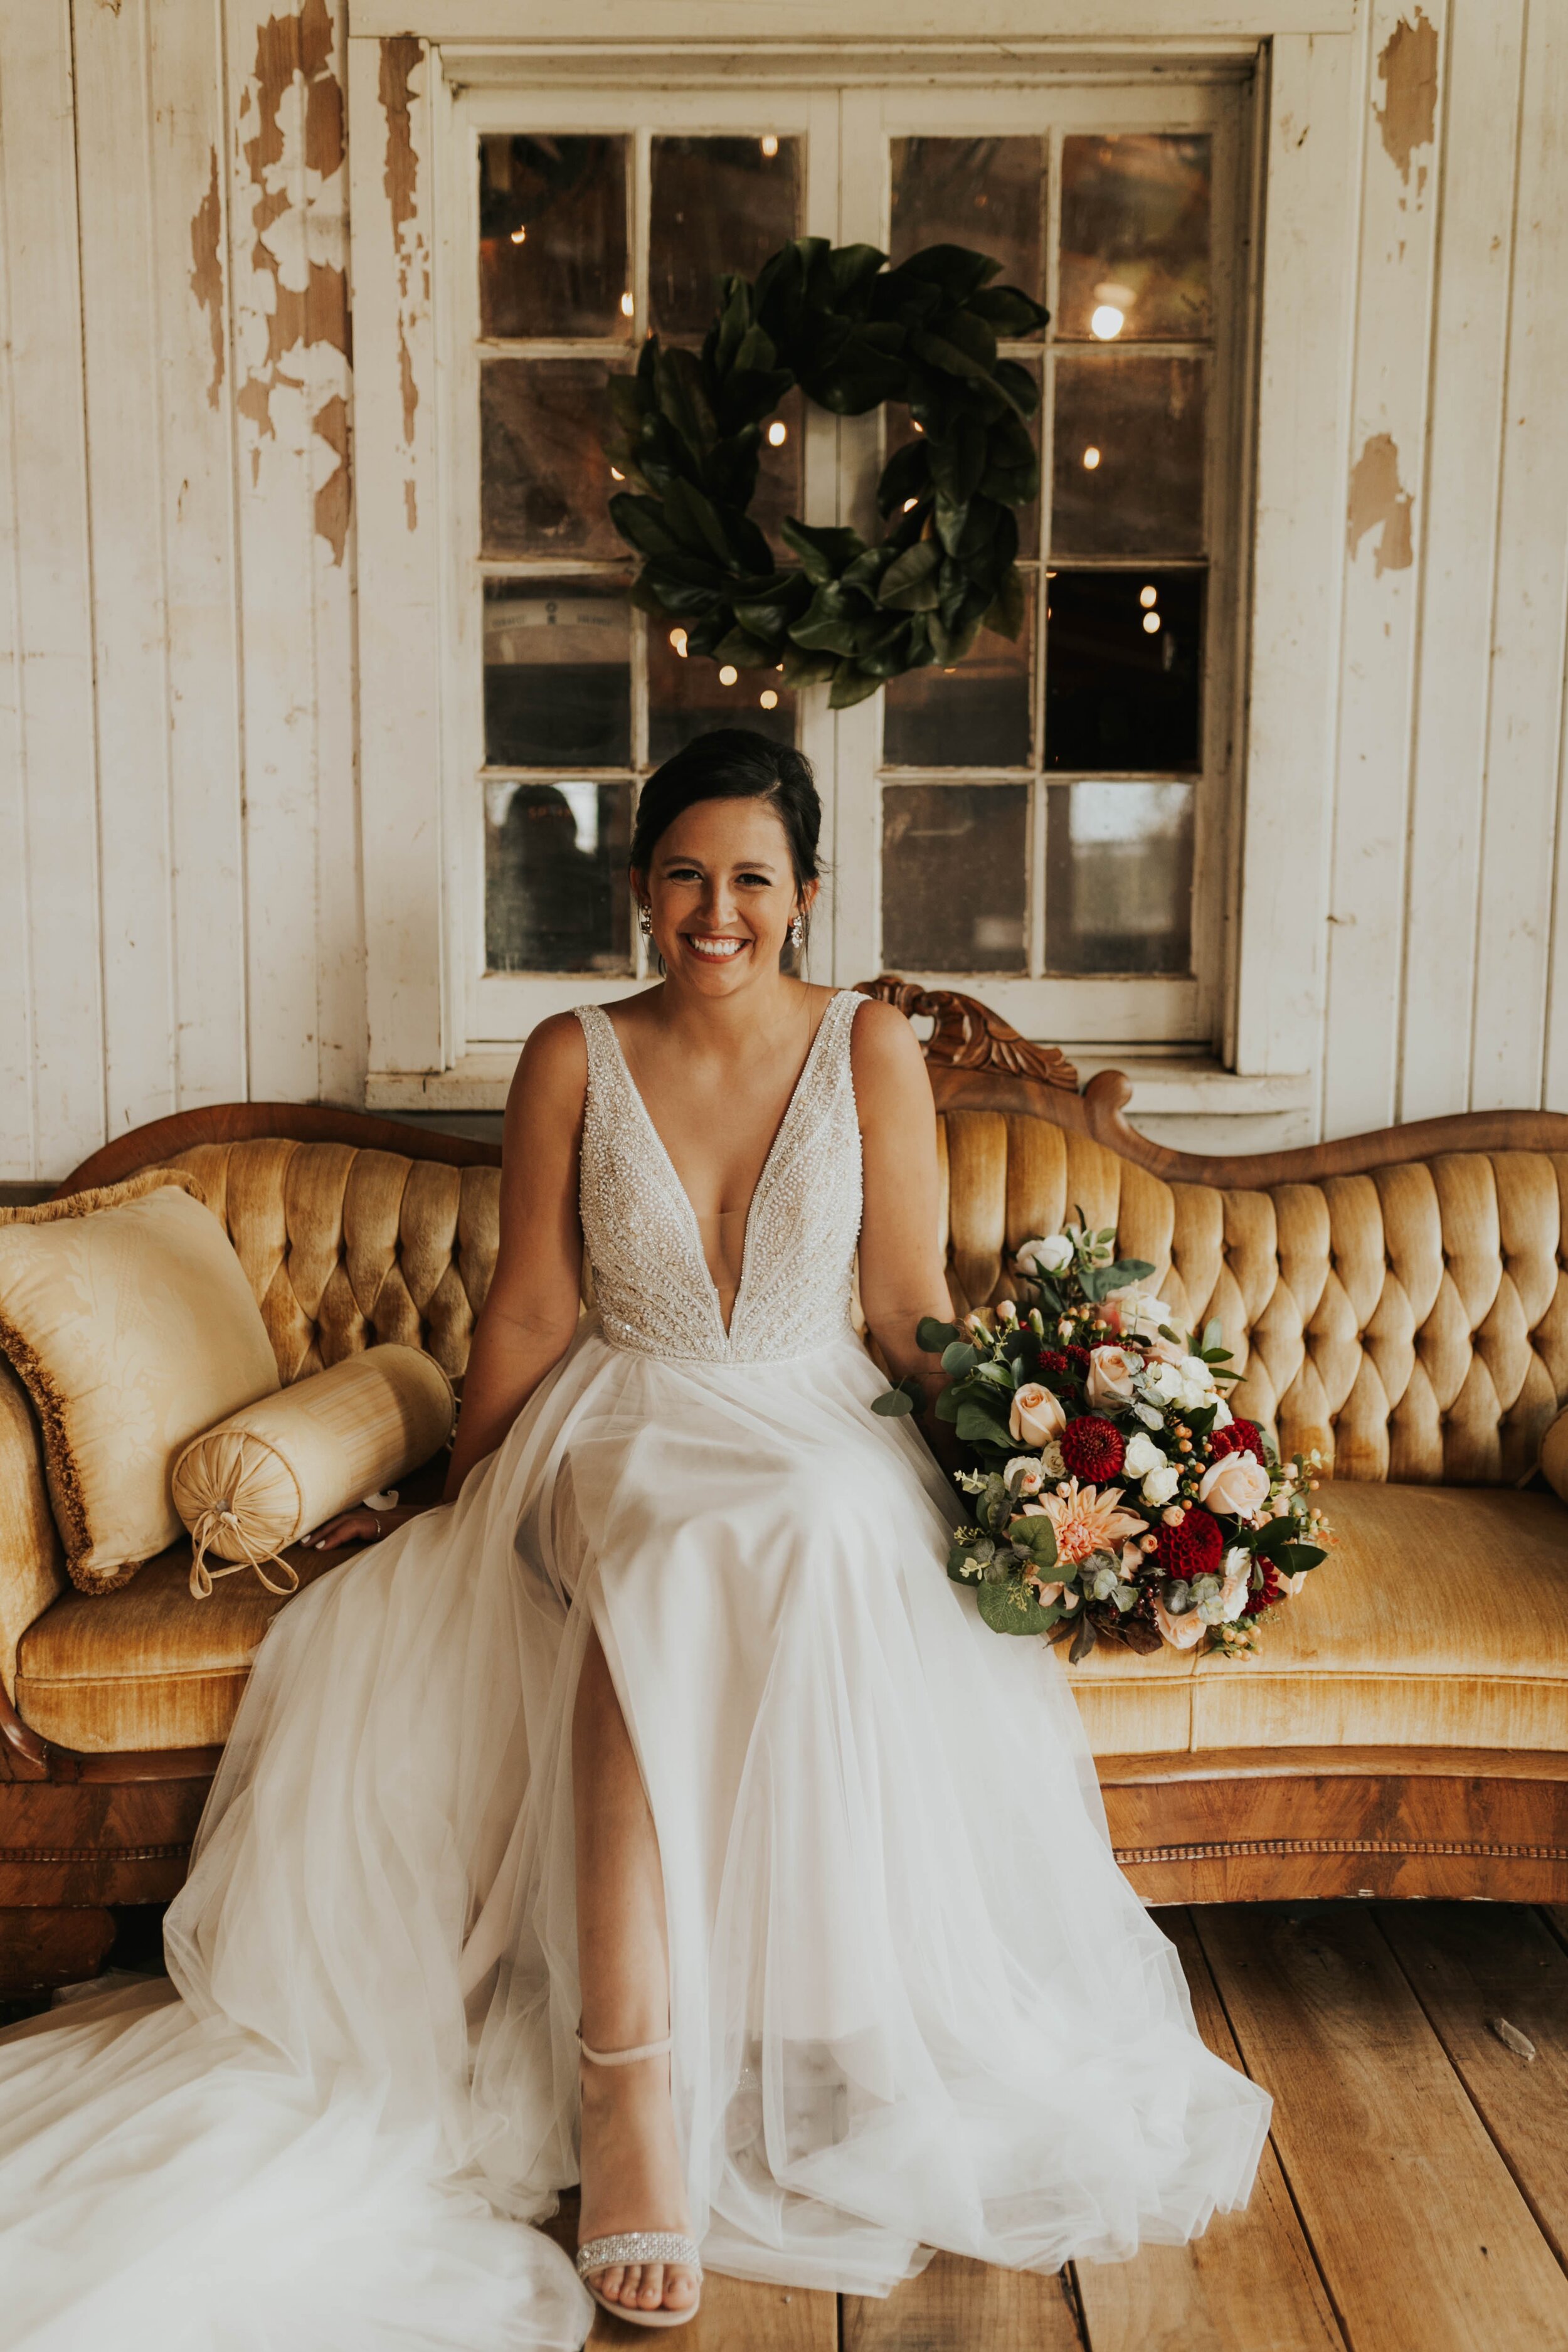 bride looking cute sitting on couch